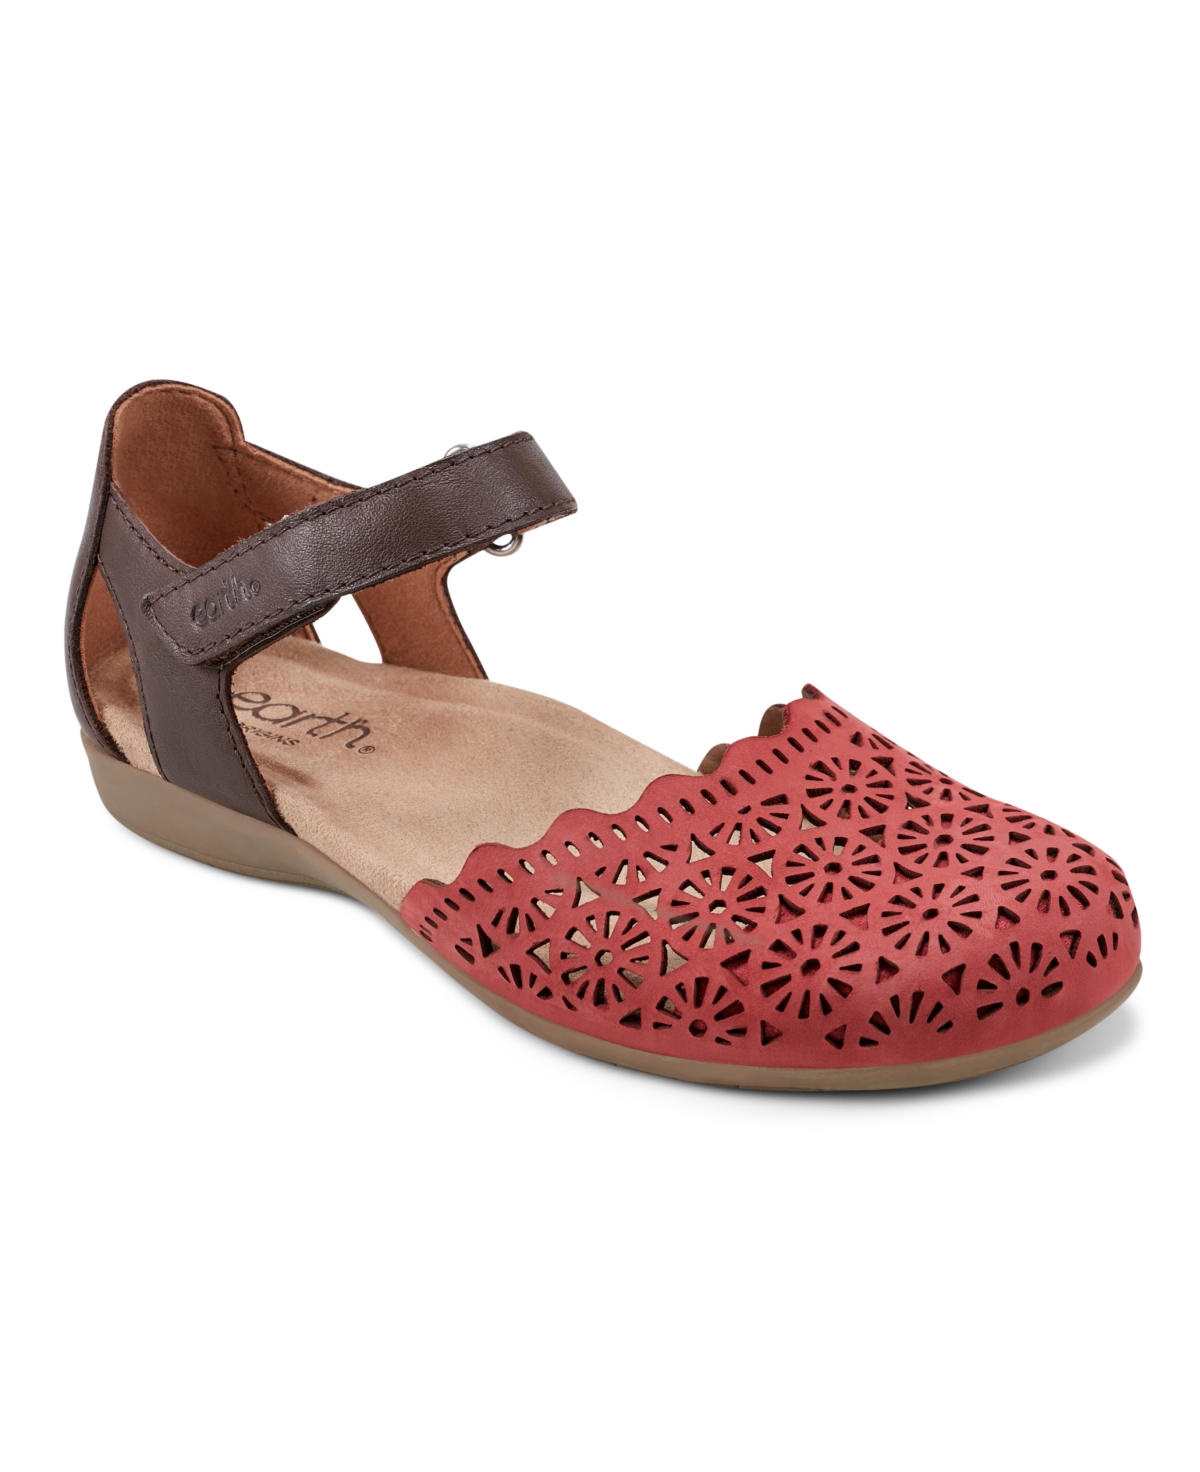 Earth Women's Bronnie Round Toe Casual Slip-on Flat Shoes - Red, Brown Multi